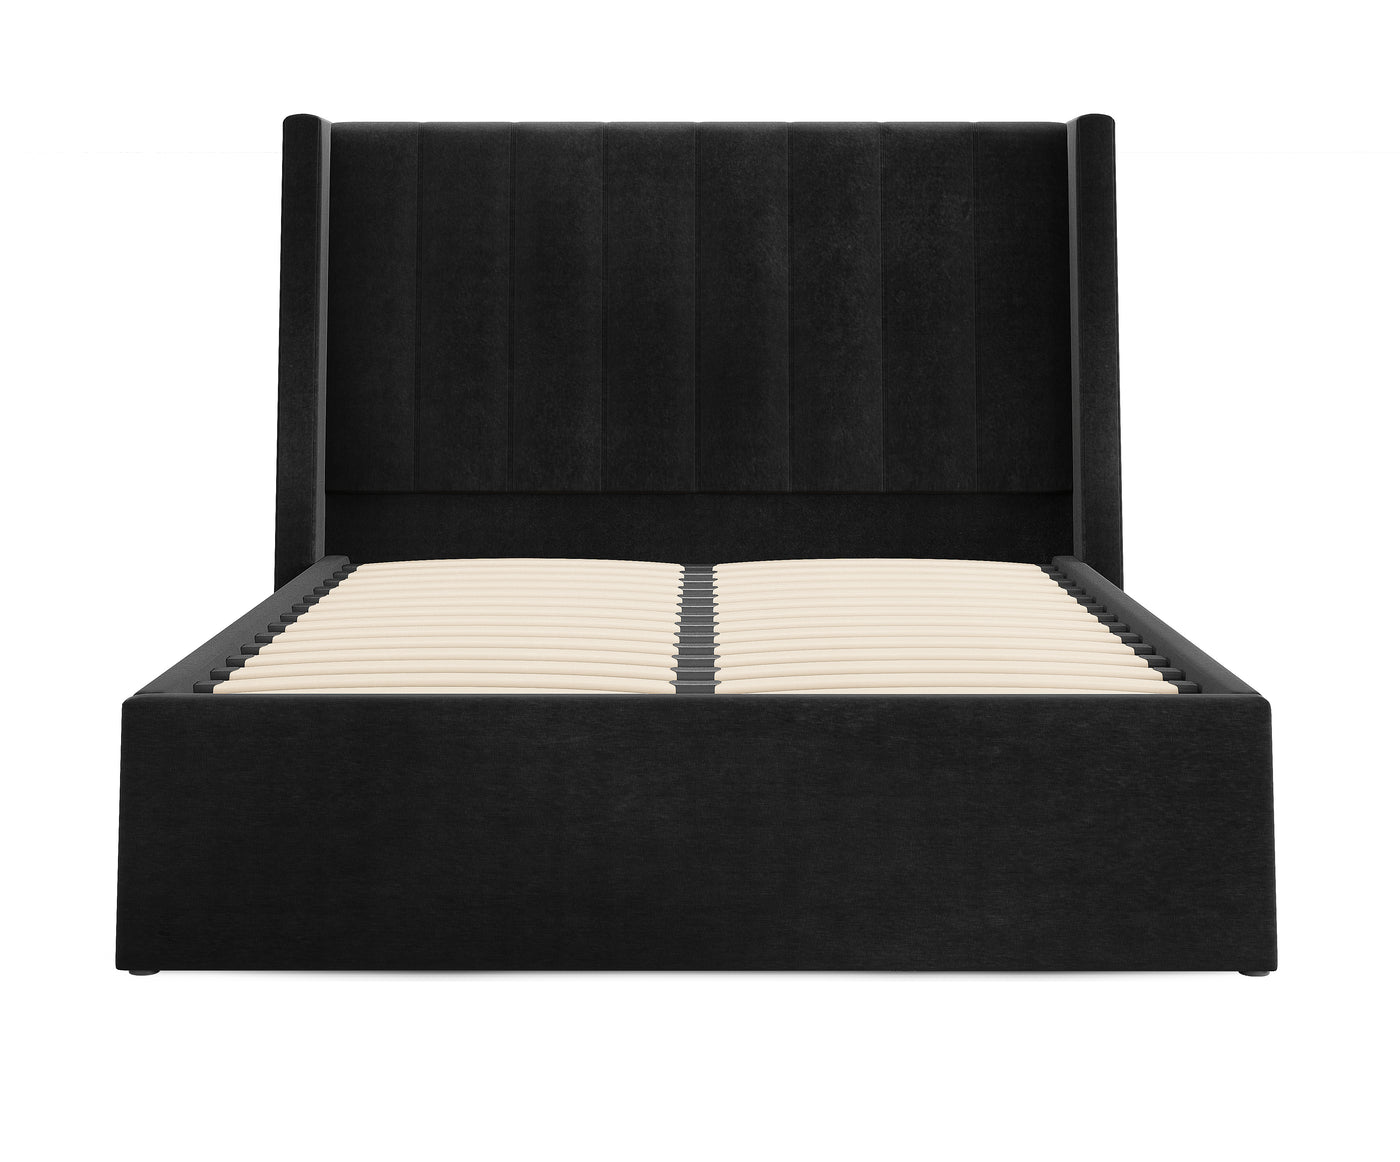 Bentleigh Gas Lift Storage Bed Frame (Charcoal Black Polyester) and Windsor Latex Pocket Spring Mattress Combo Deal (7842009219326)